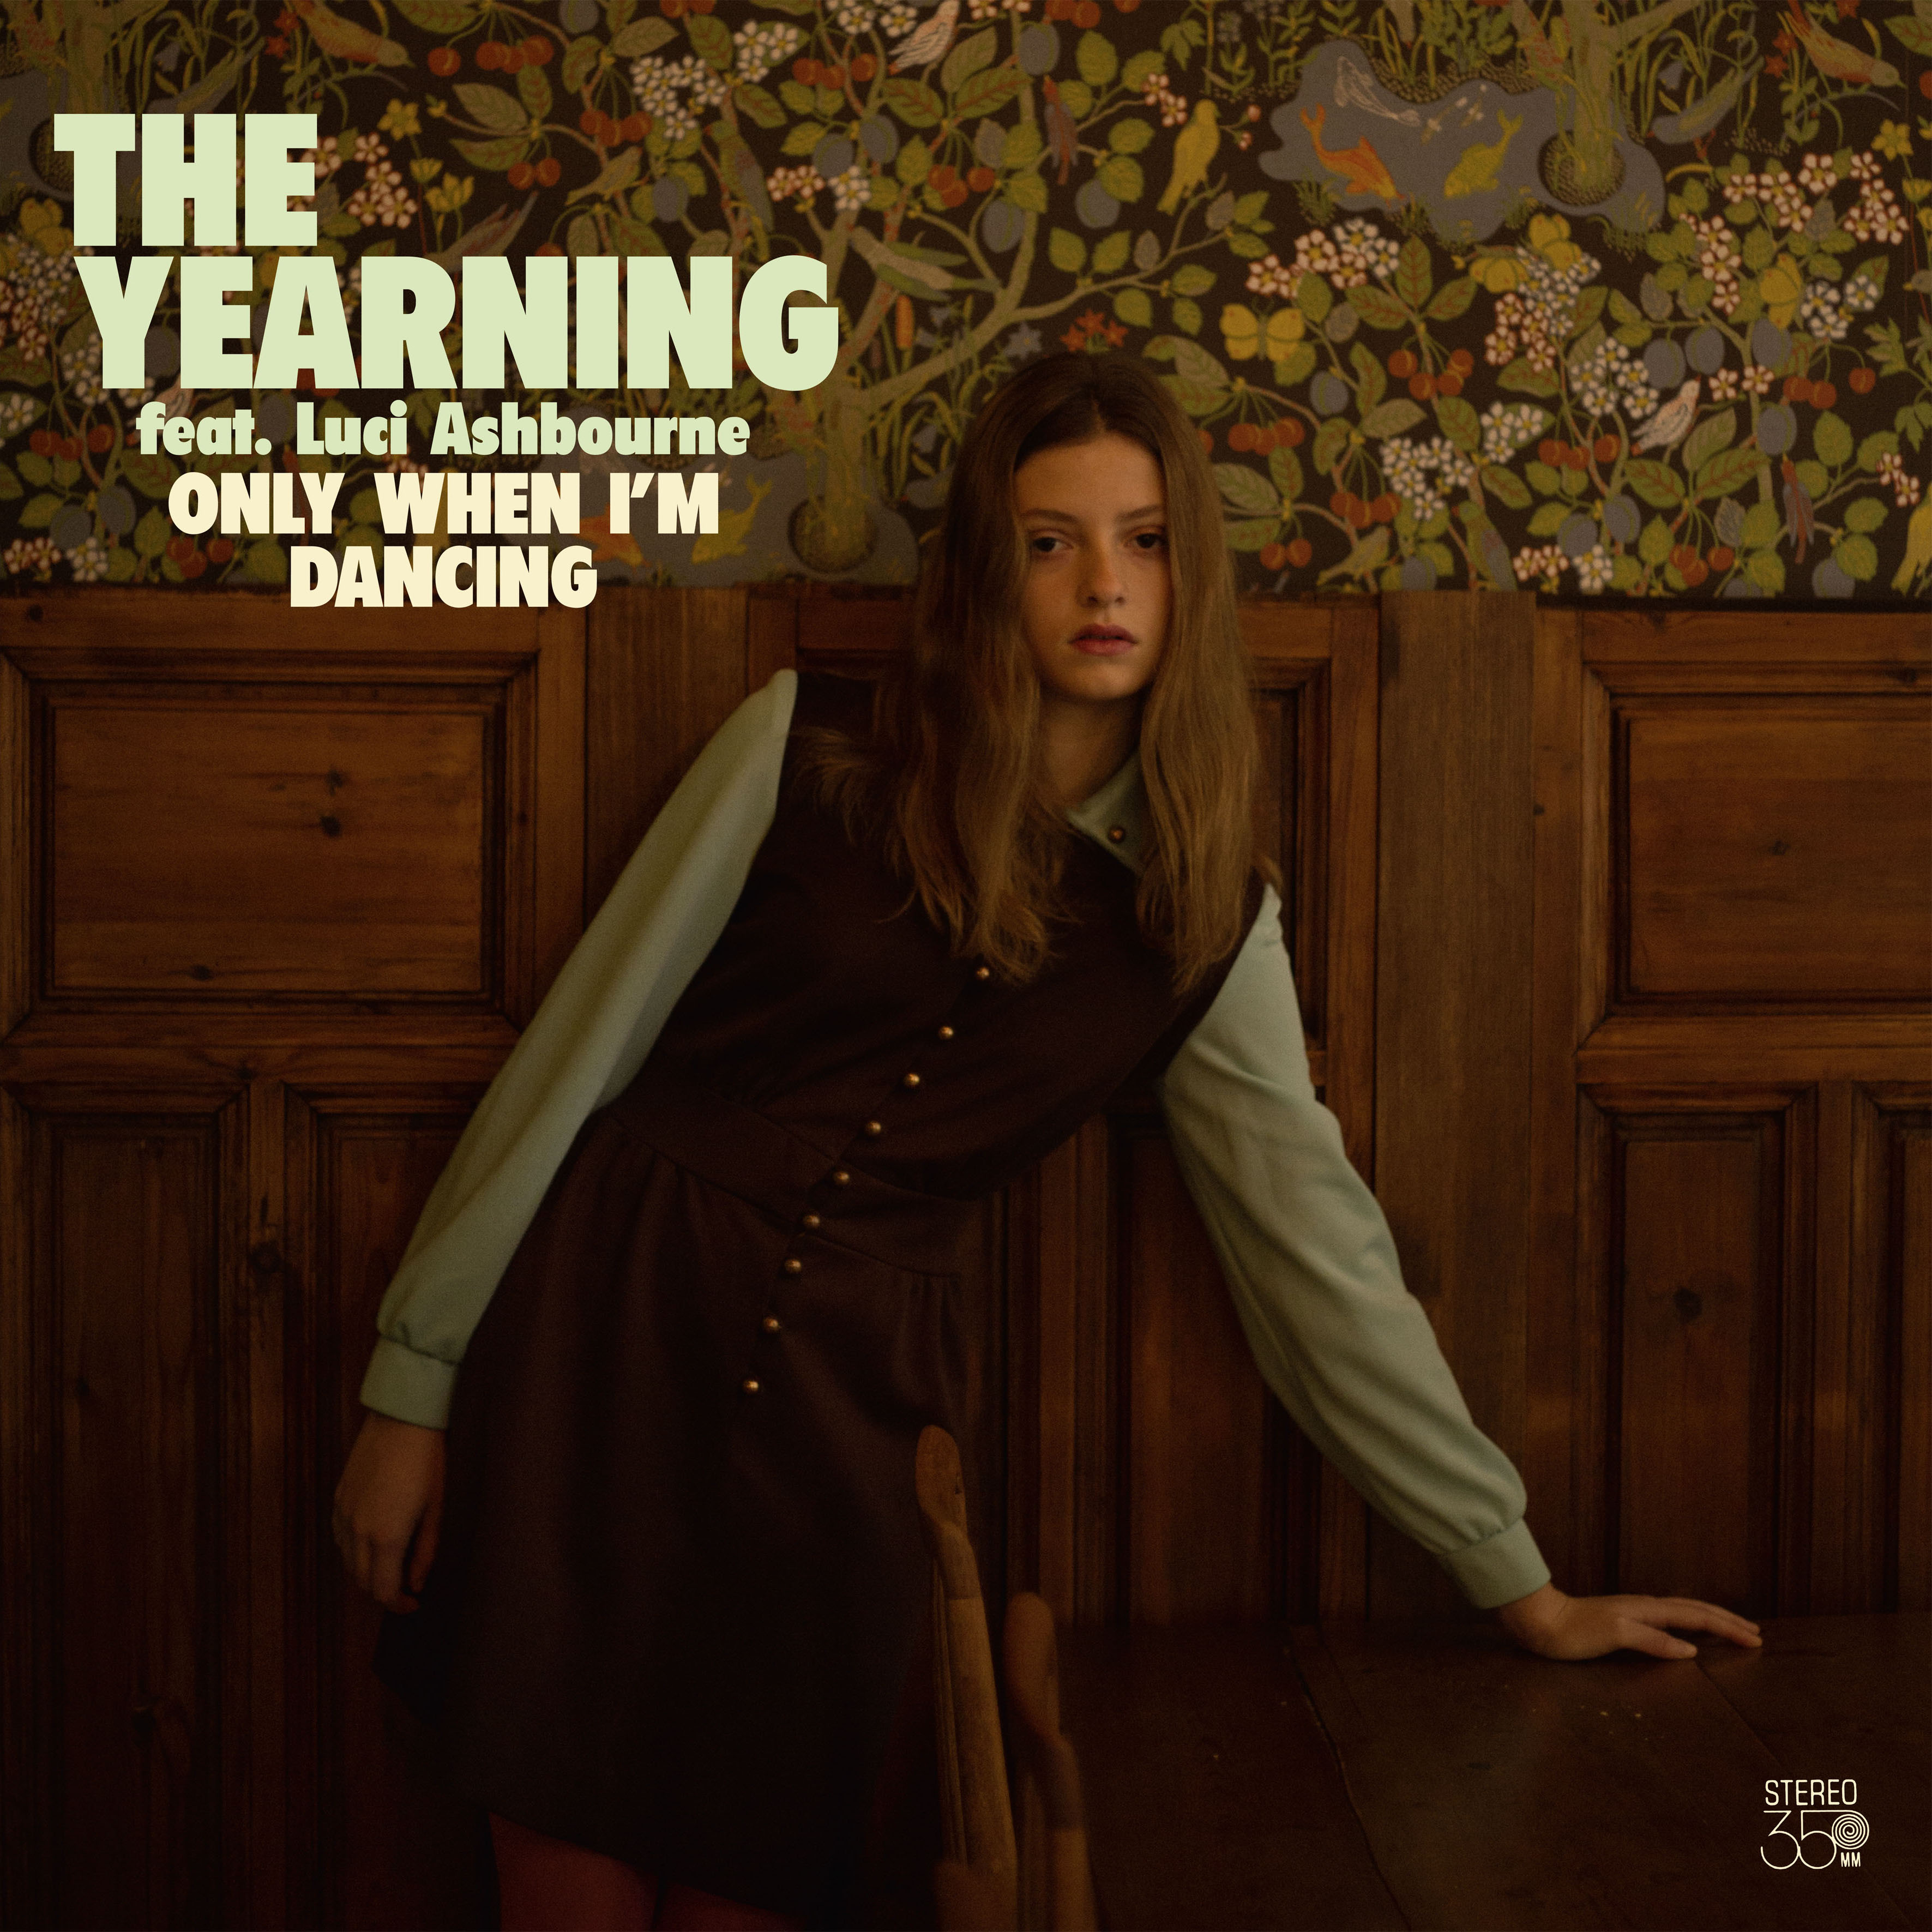 The Yearning "Only When I'm Dancing" Album